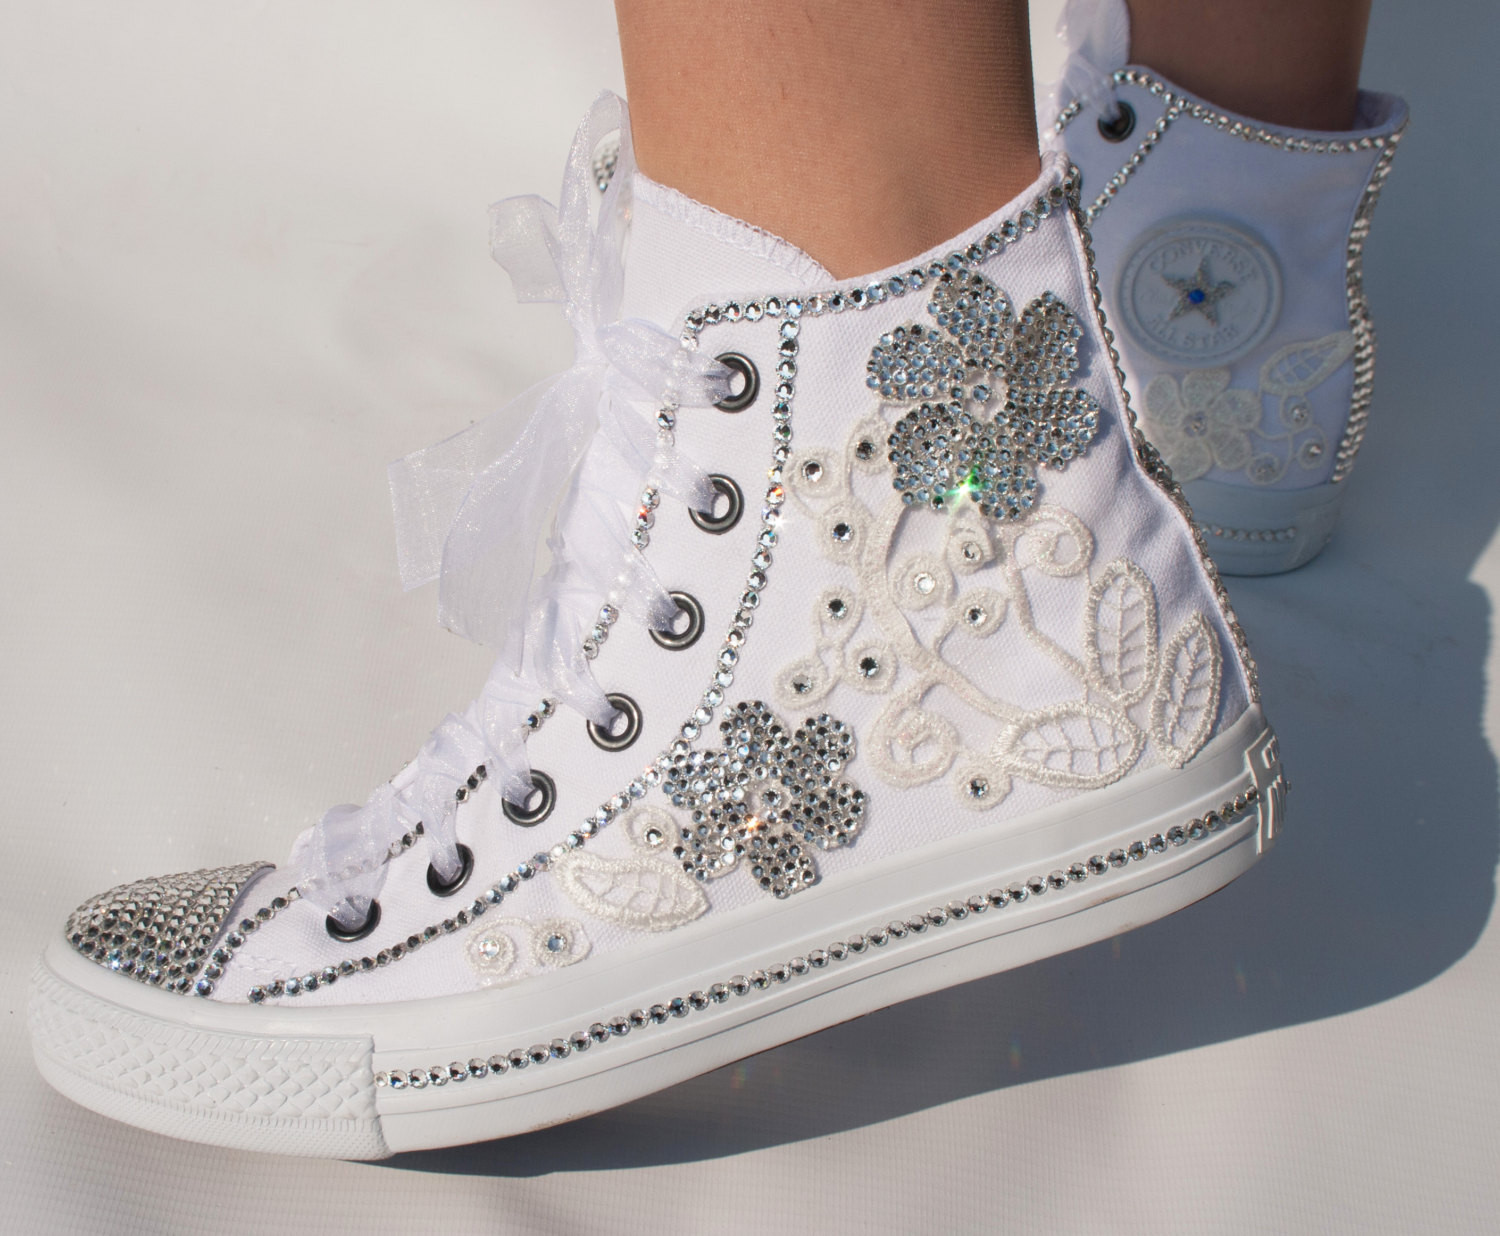 Wedding Converse Shoes
 Romantic wedding converse High top wedding trainers with